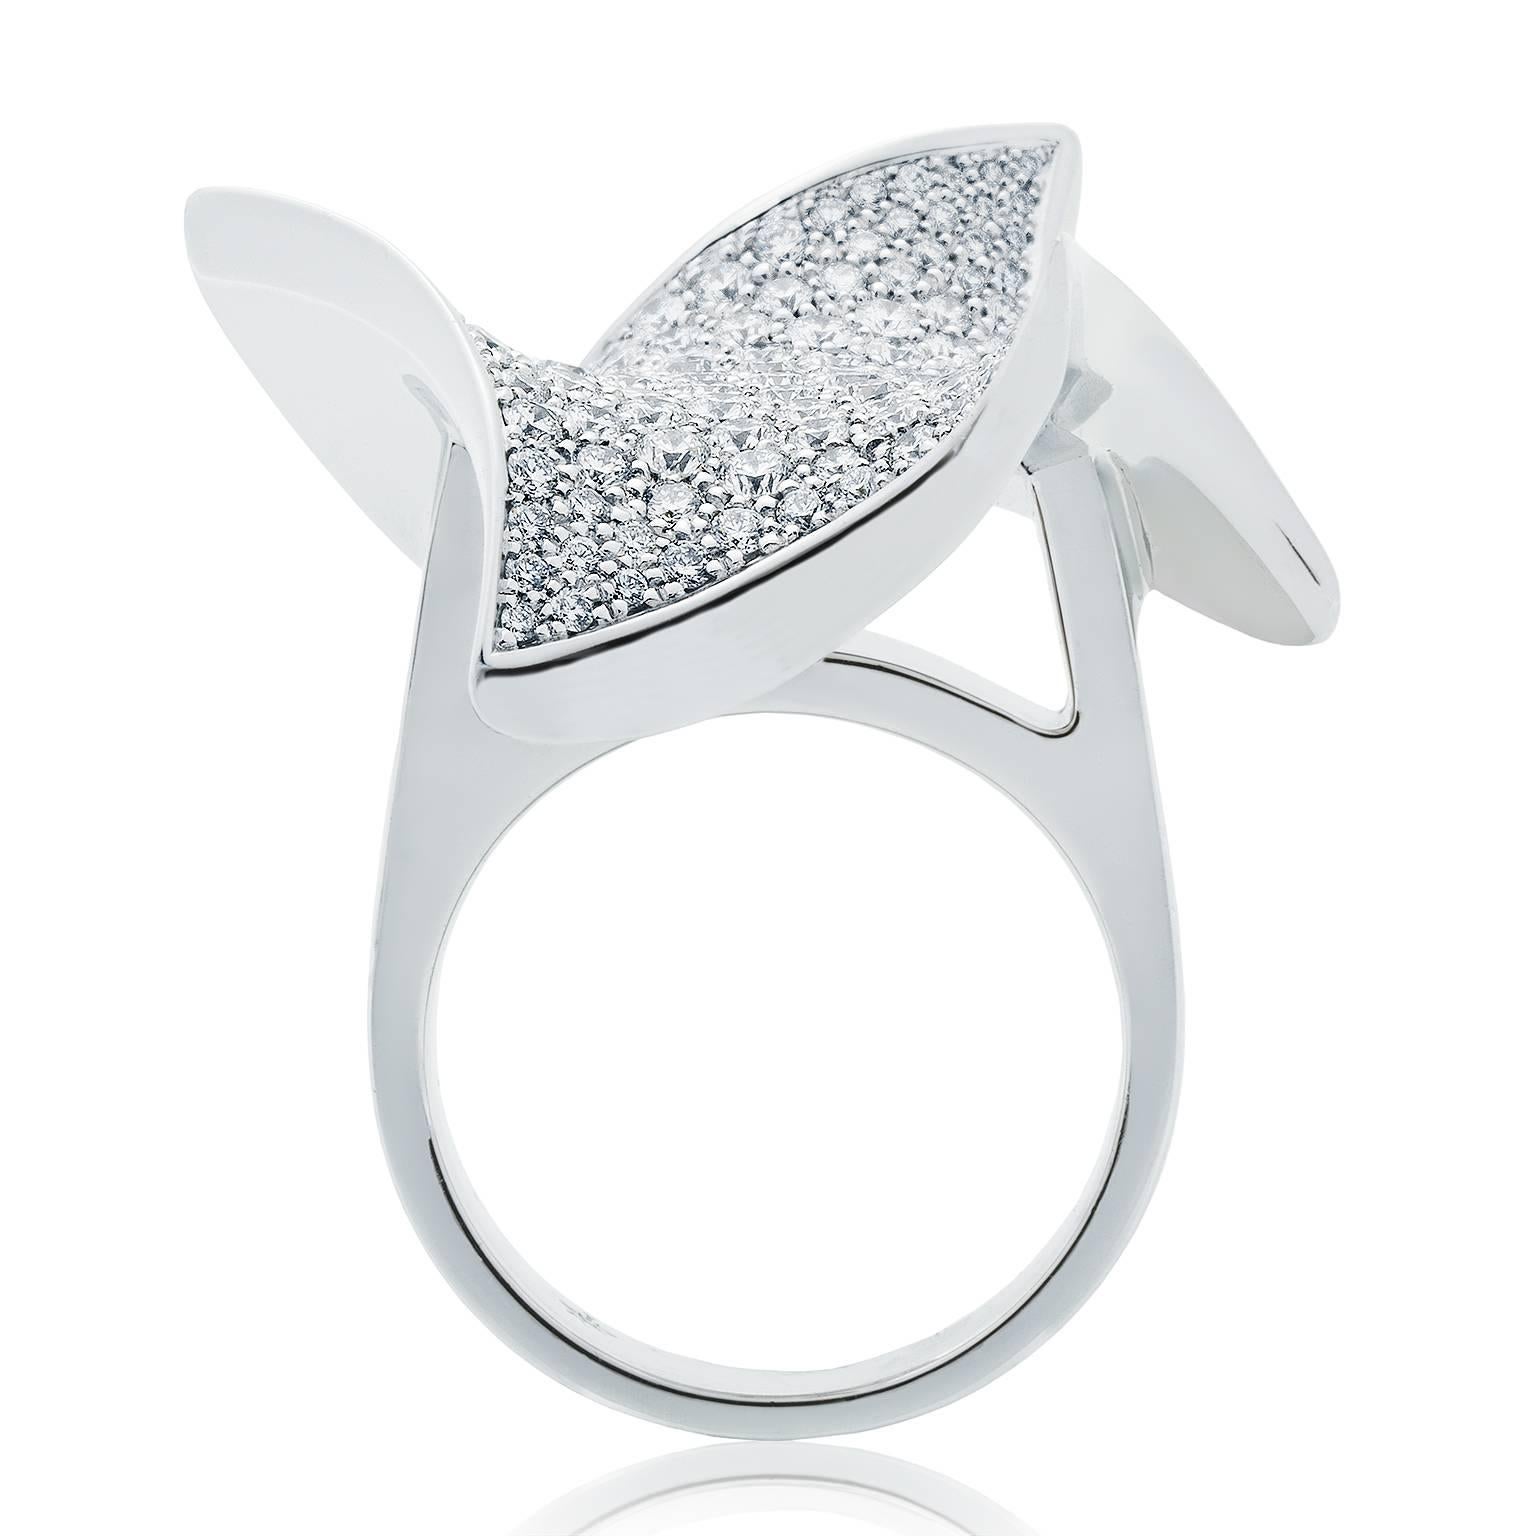 Towe Norlen Mantaray 2.33 Carat Contemporary Diamond Cocktail Ring For Sale 2